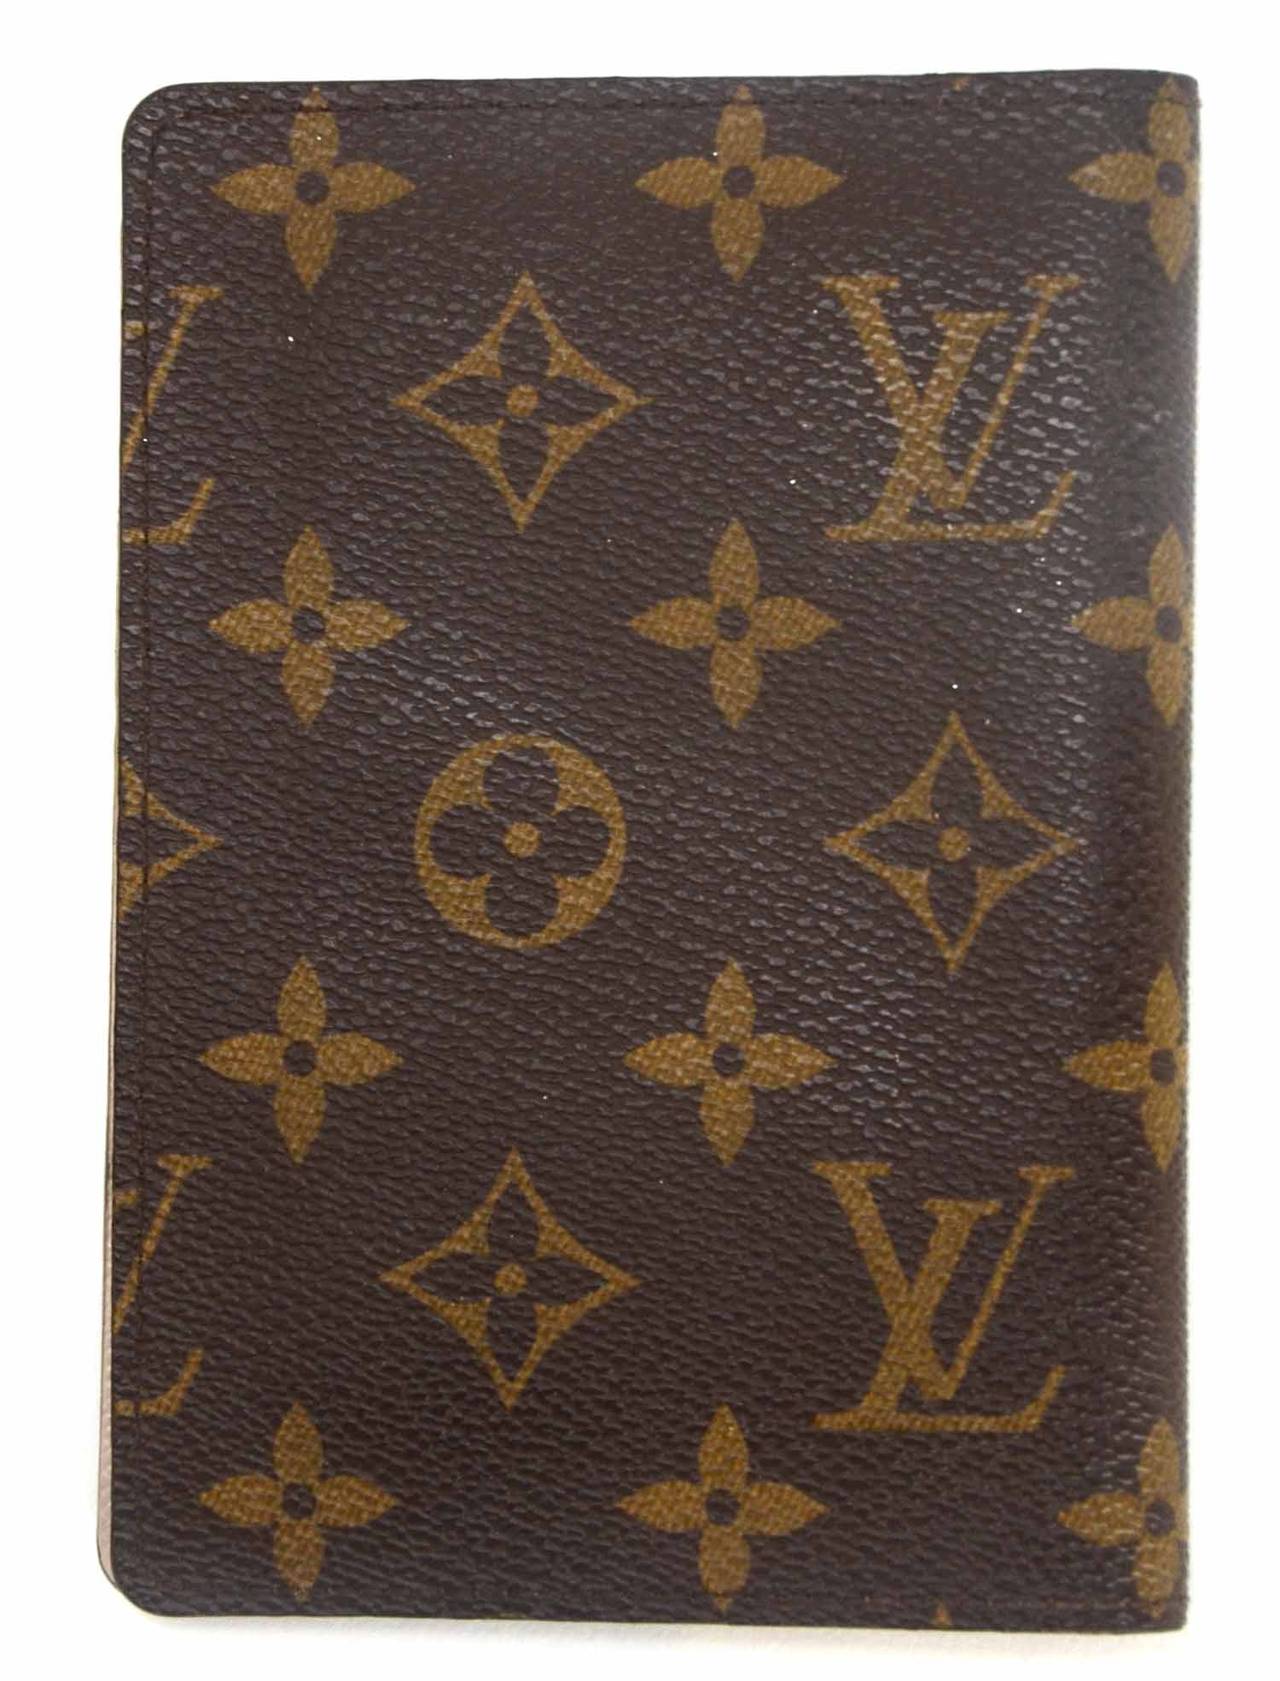 LOUIS VUITTON Monogram Limited Edition Trunks and Locks Passport Cover c.'13

    Made in: Spain
    Year of Production: 2013
    Color: Monogram
    Materials: Coated canvas
    Lining: Coated canvas
    Interior Pockets: 3 Credit card